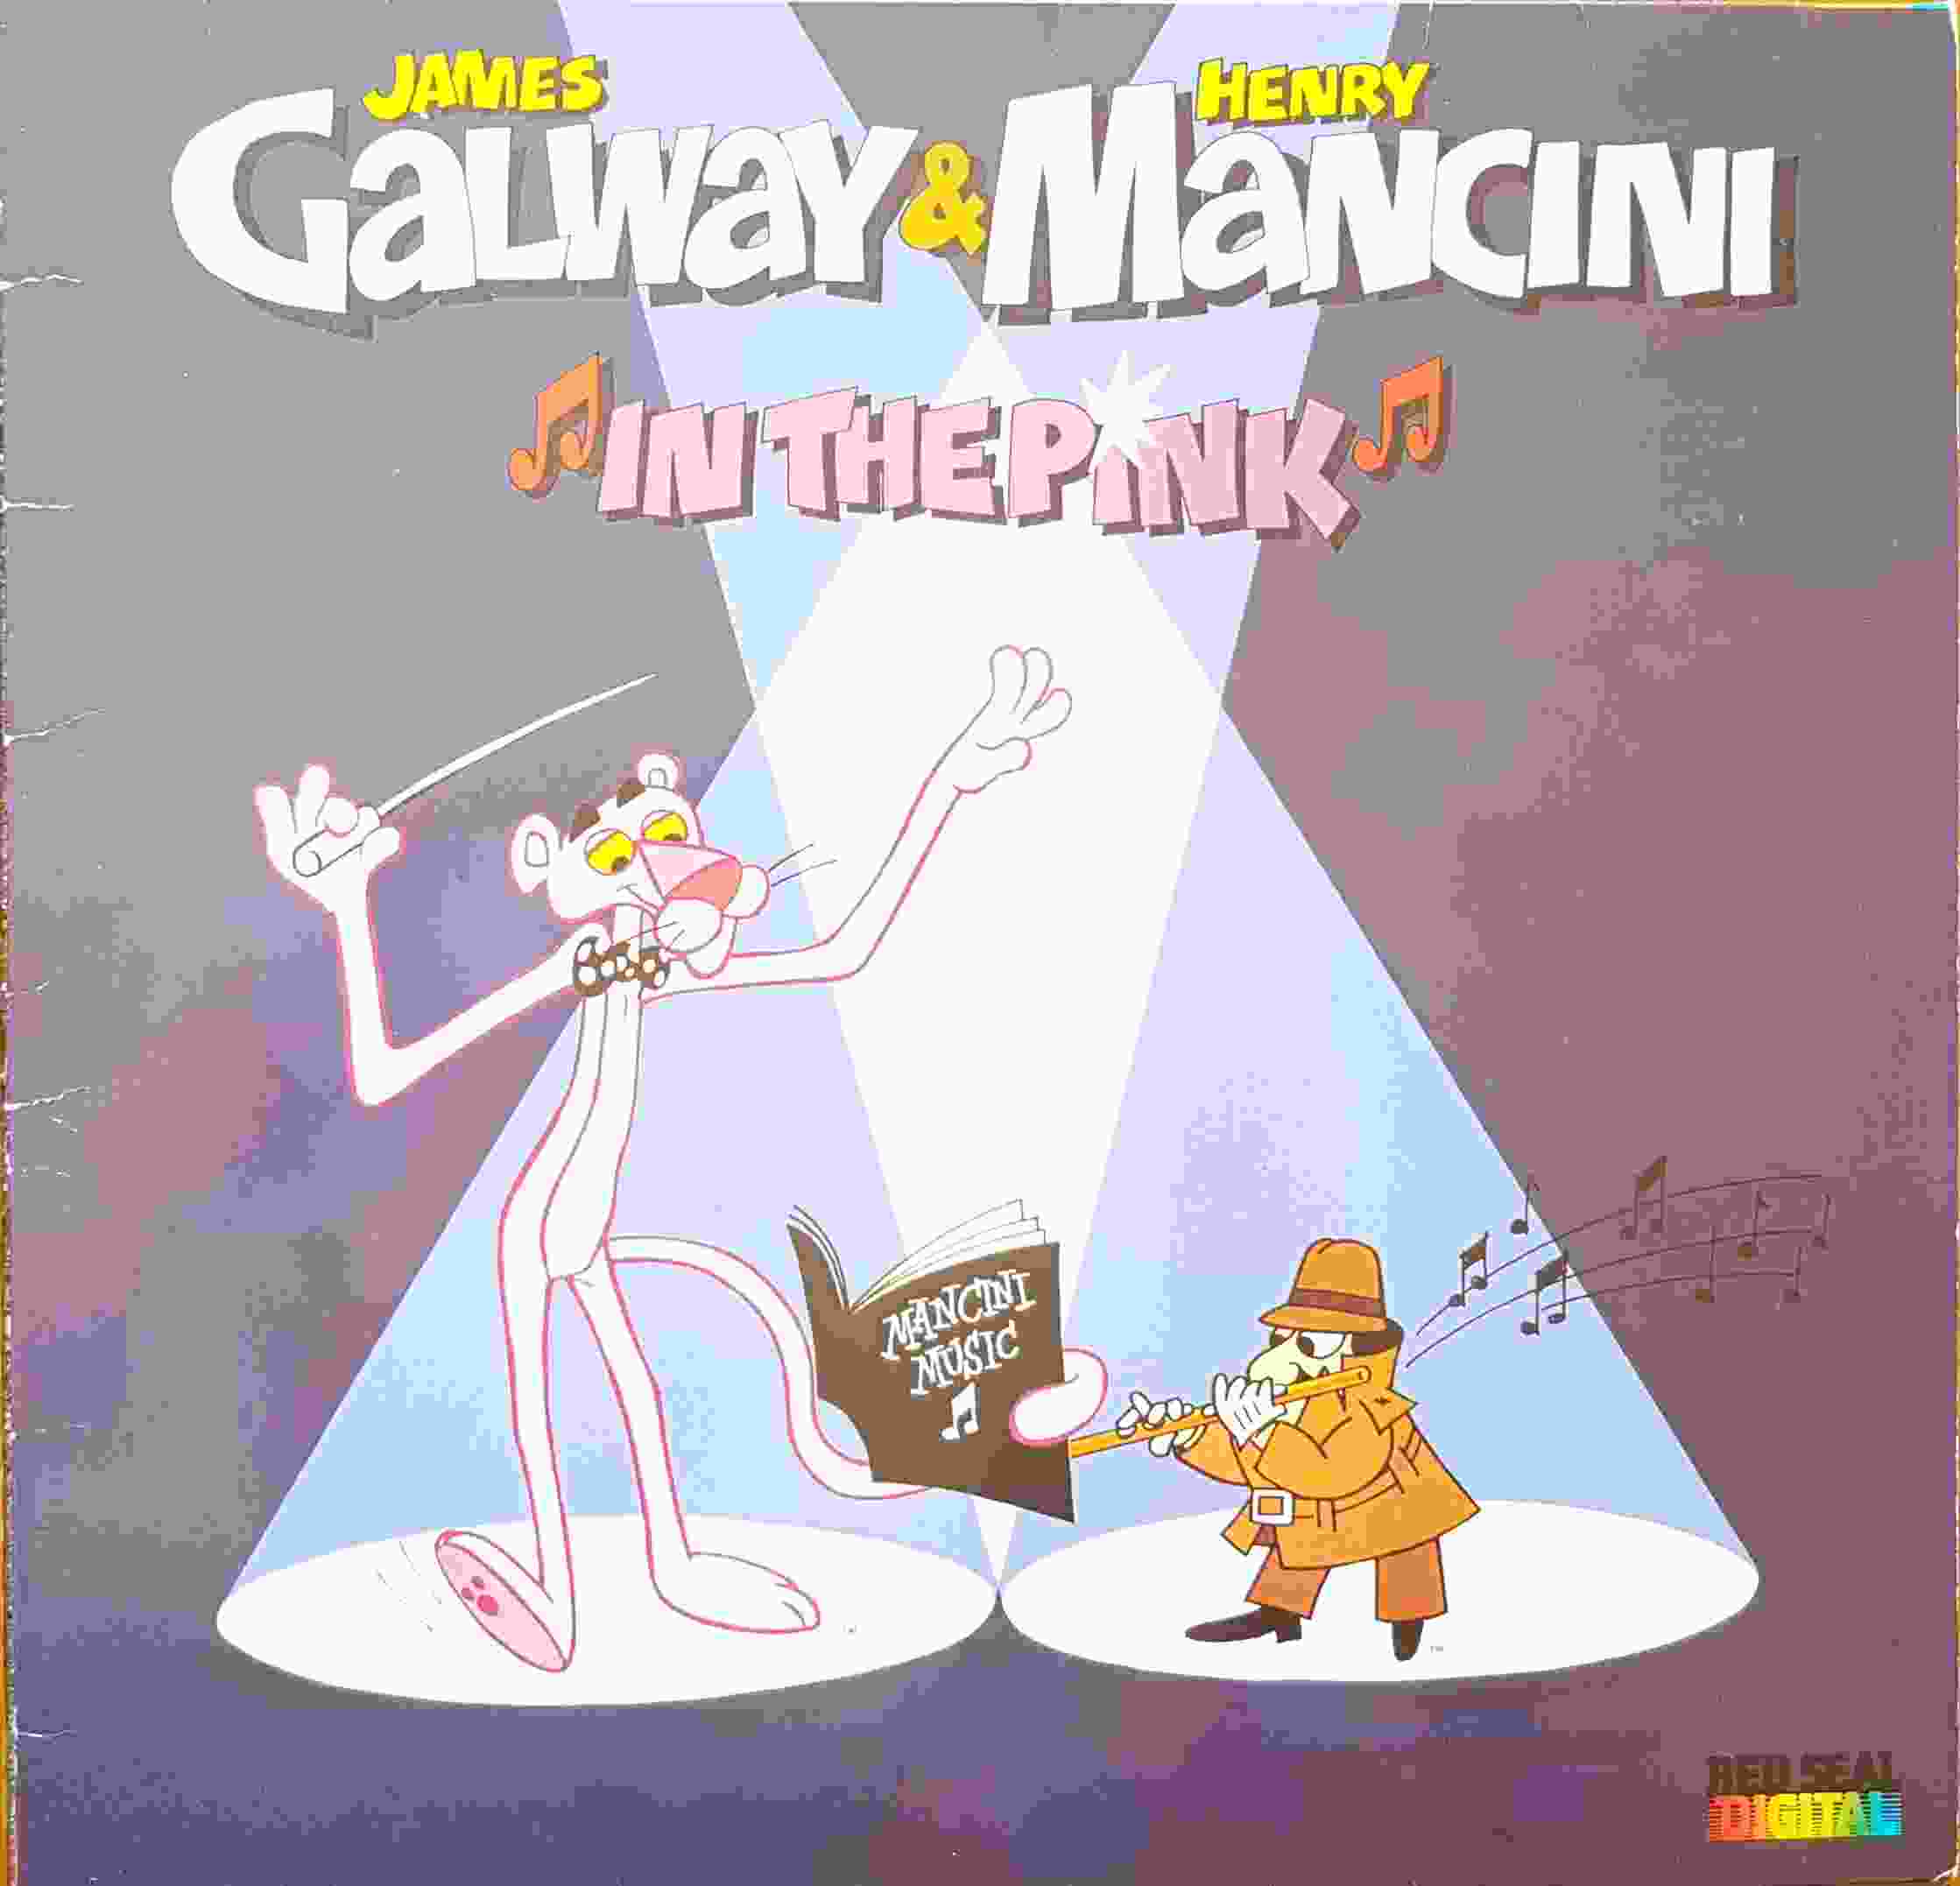 Picture of RL 85315 In the pink by artist Henry Mancini / Bricusse / James Galway from ITV, Channel 4 and Channel 5 library